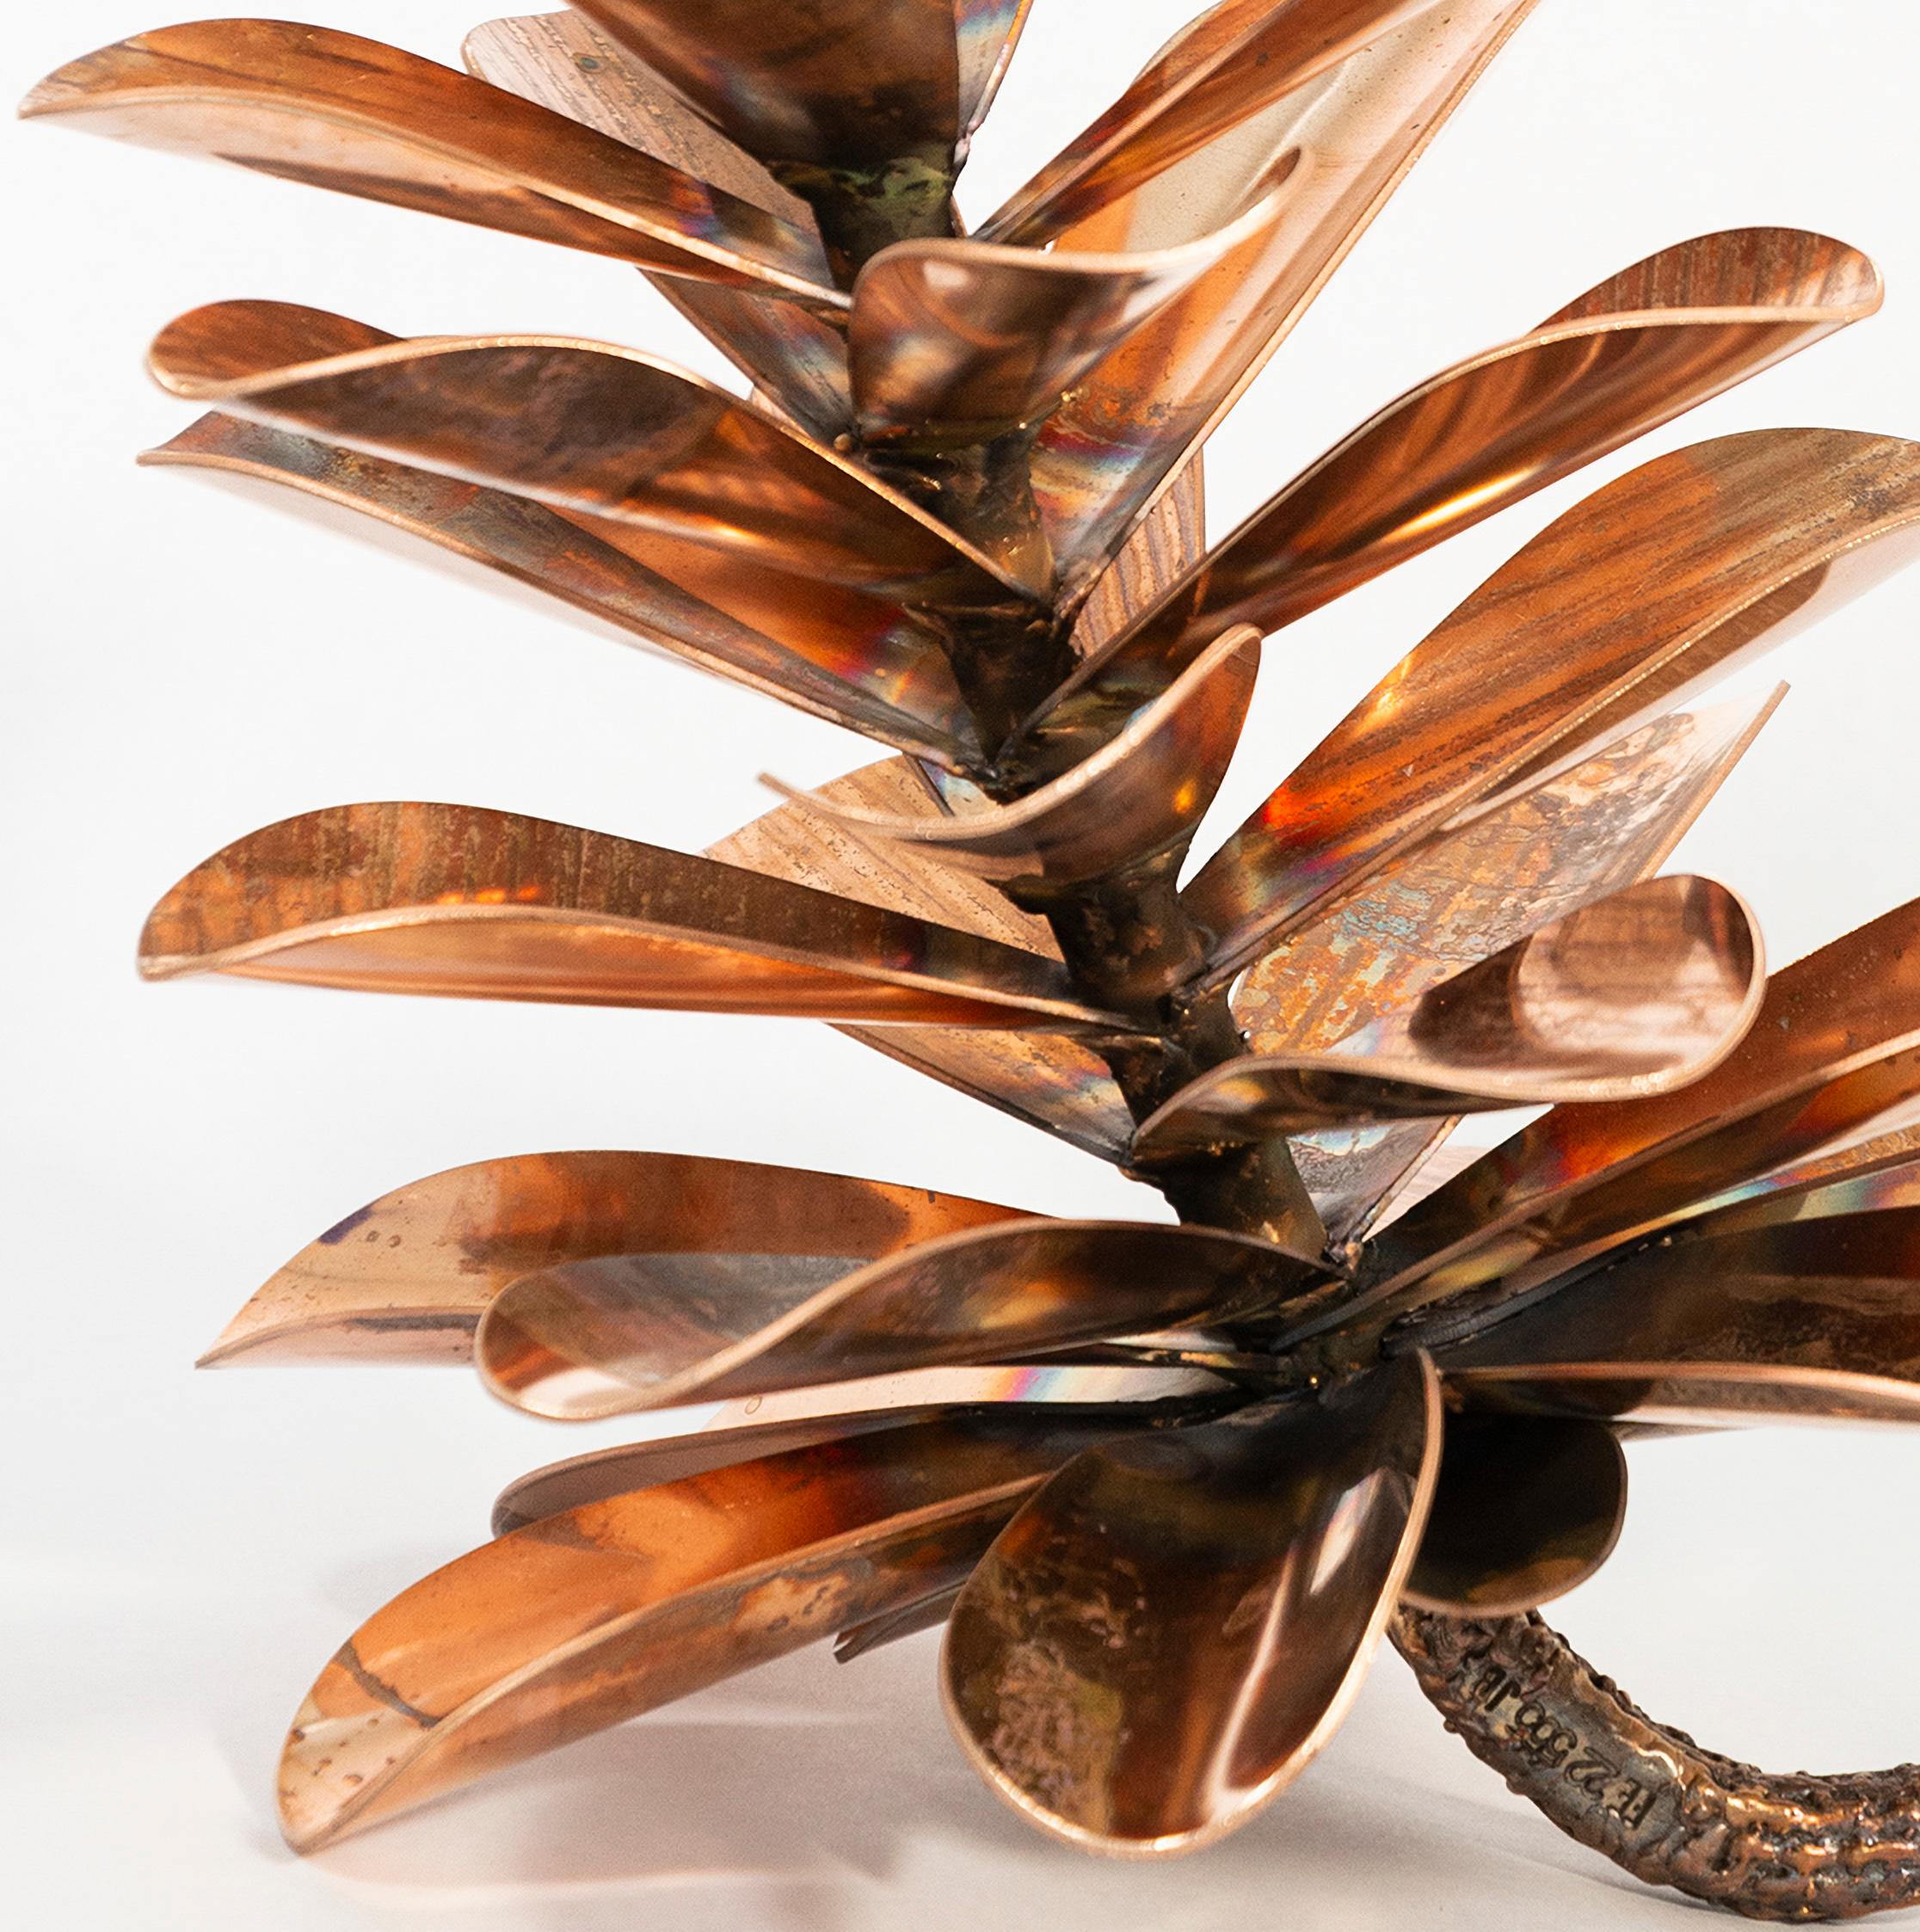 Bronze Pine Cone 22-555 - nature inspired, still life, forged bronze sculpture - Contemporary Sculpture by Floyd Elzinga